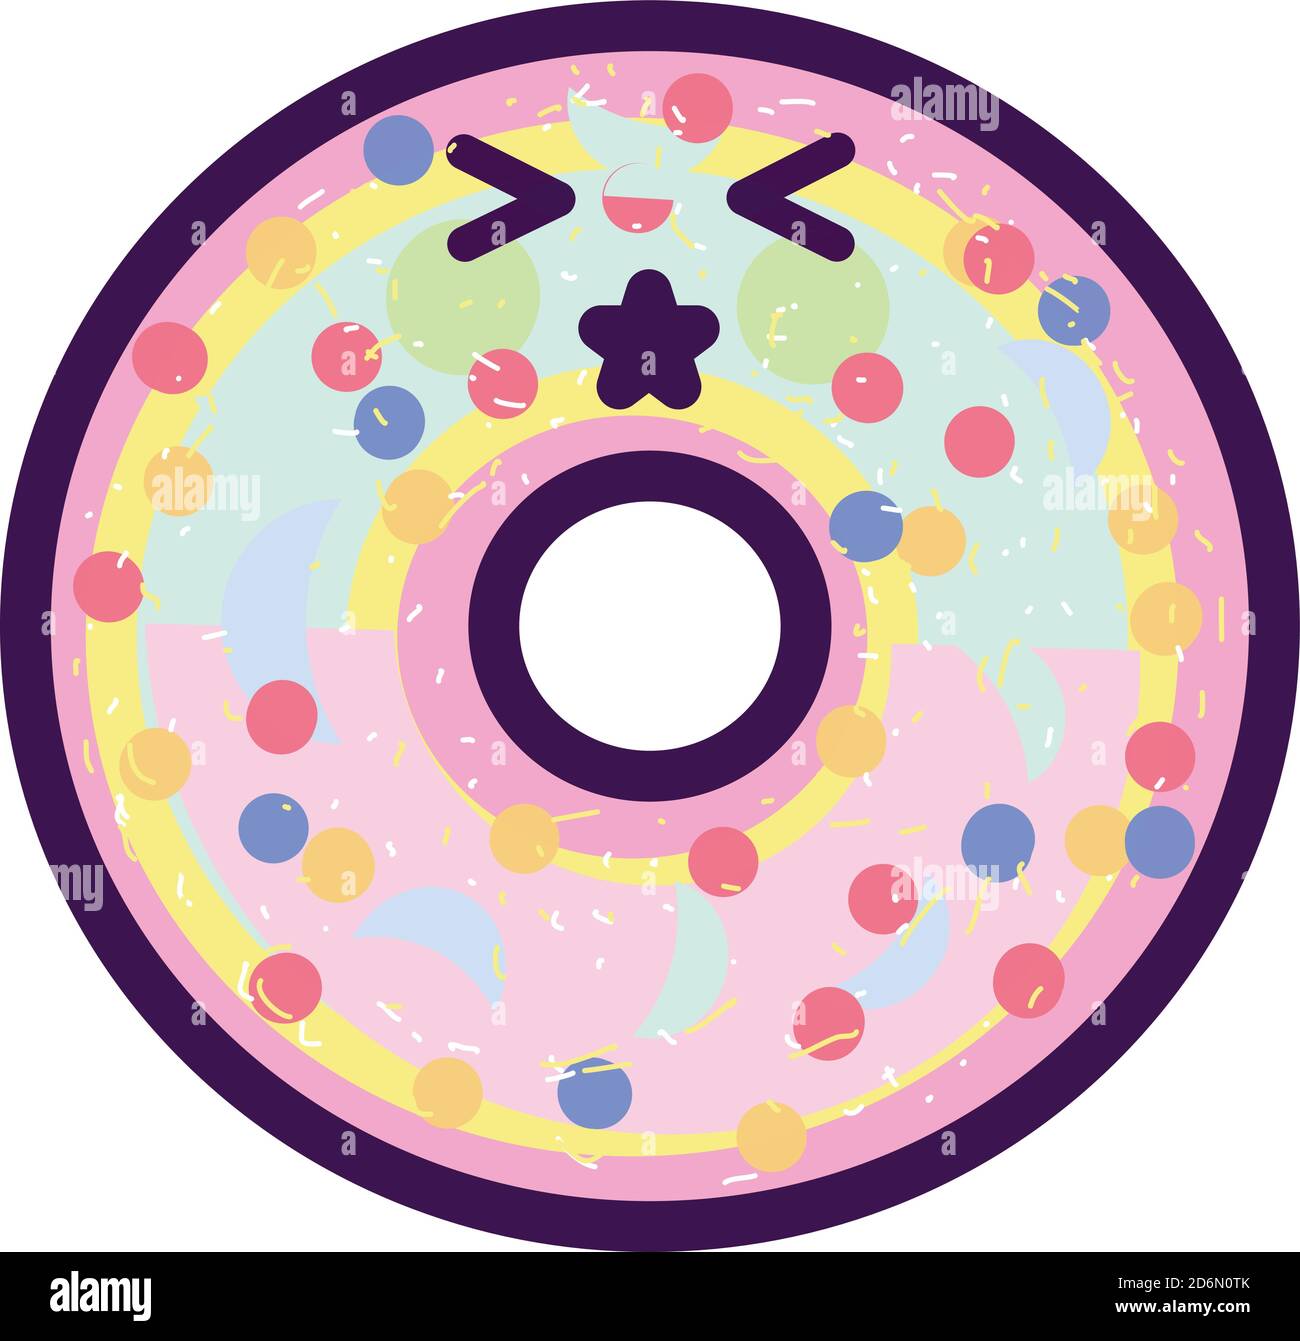 Donut with a cute face, illustration, vector on white background Stock Vector